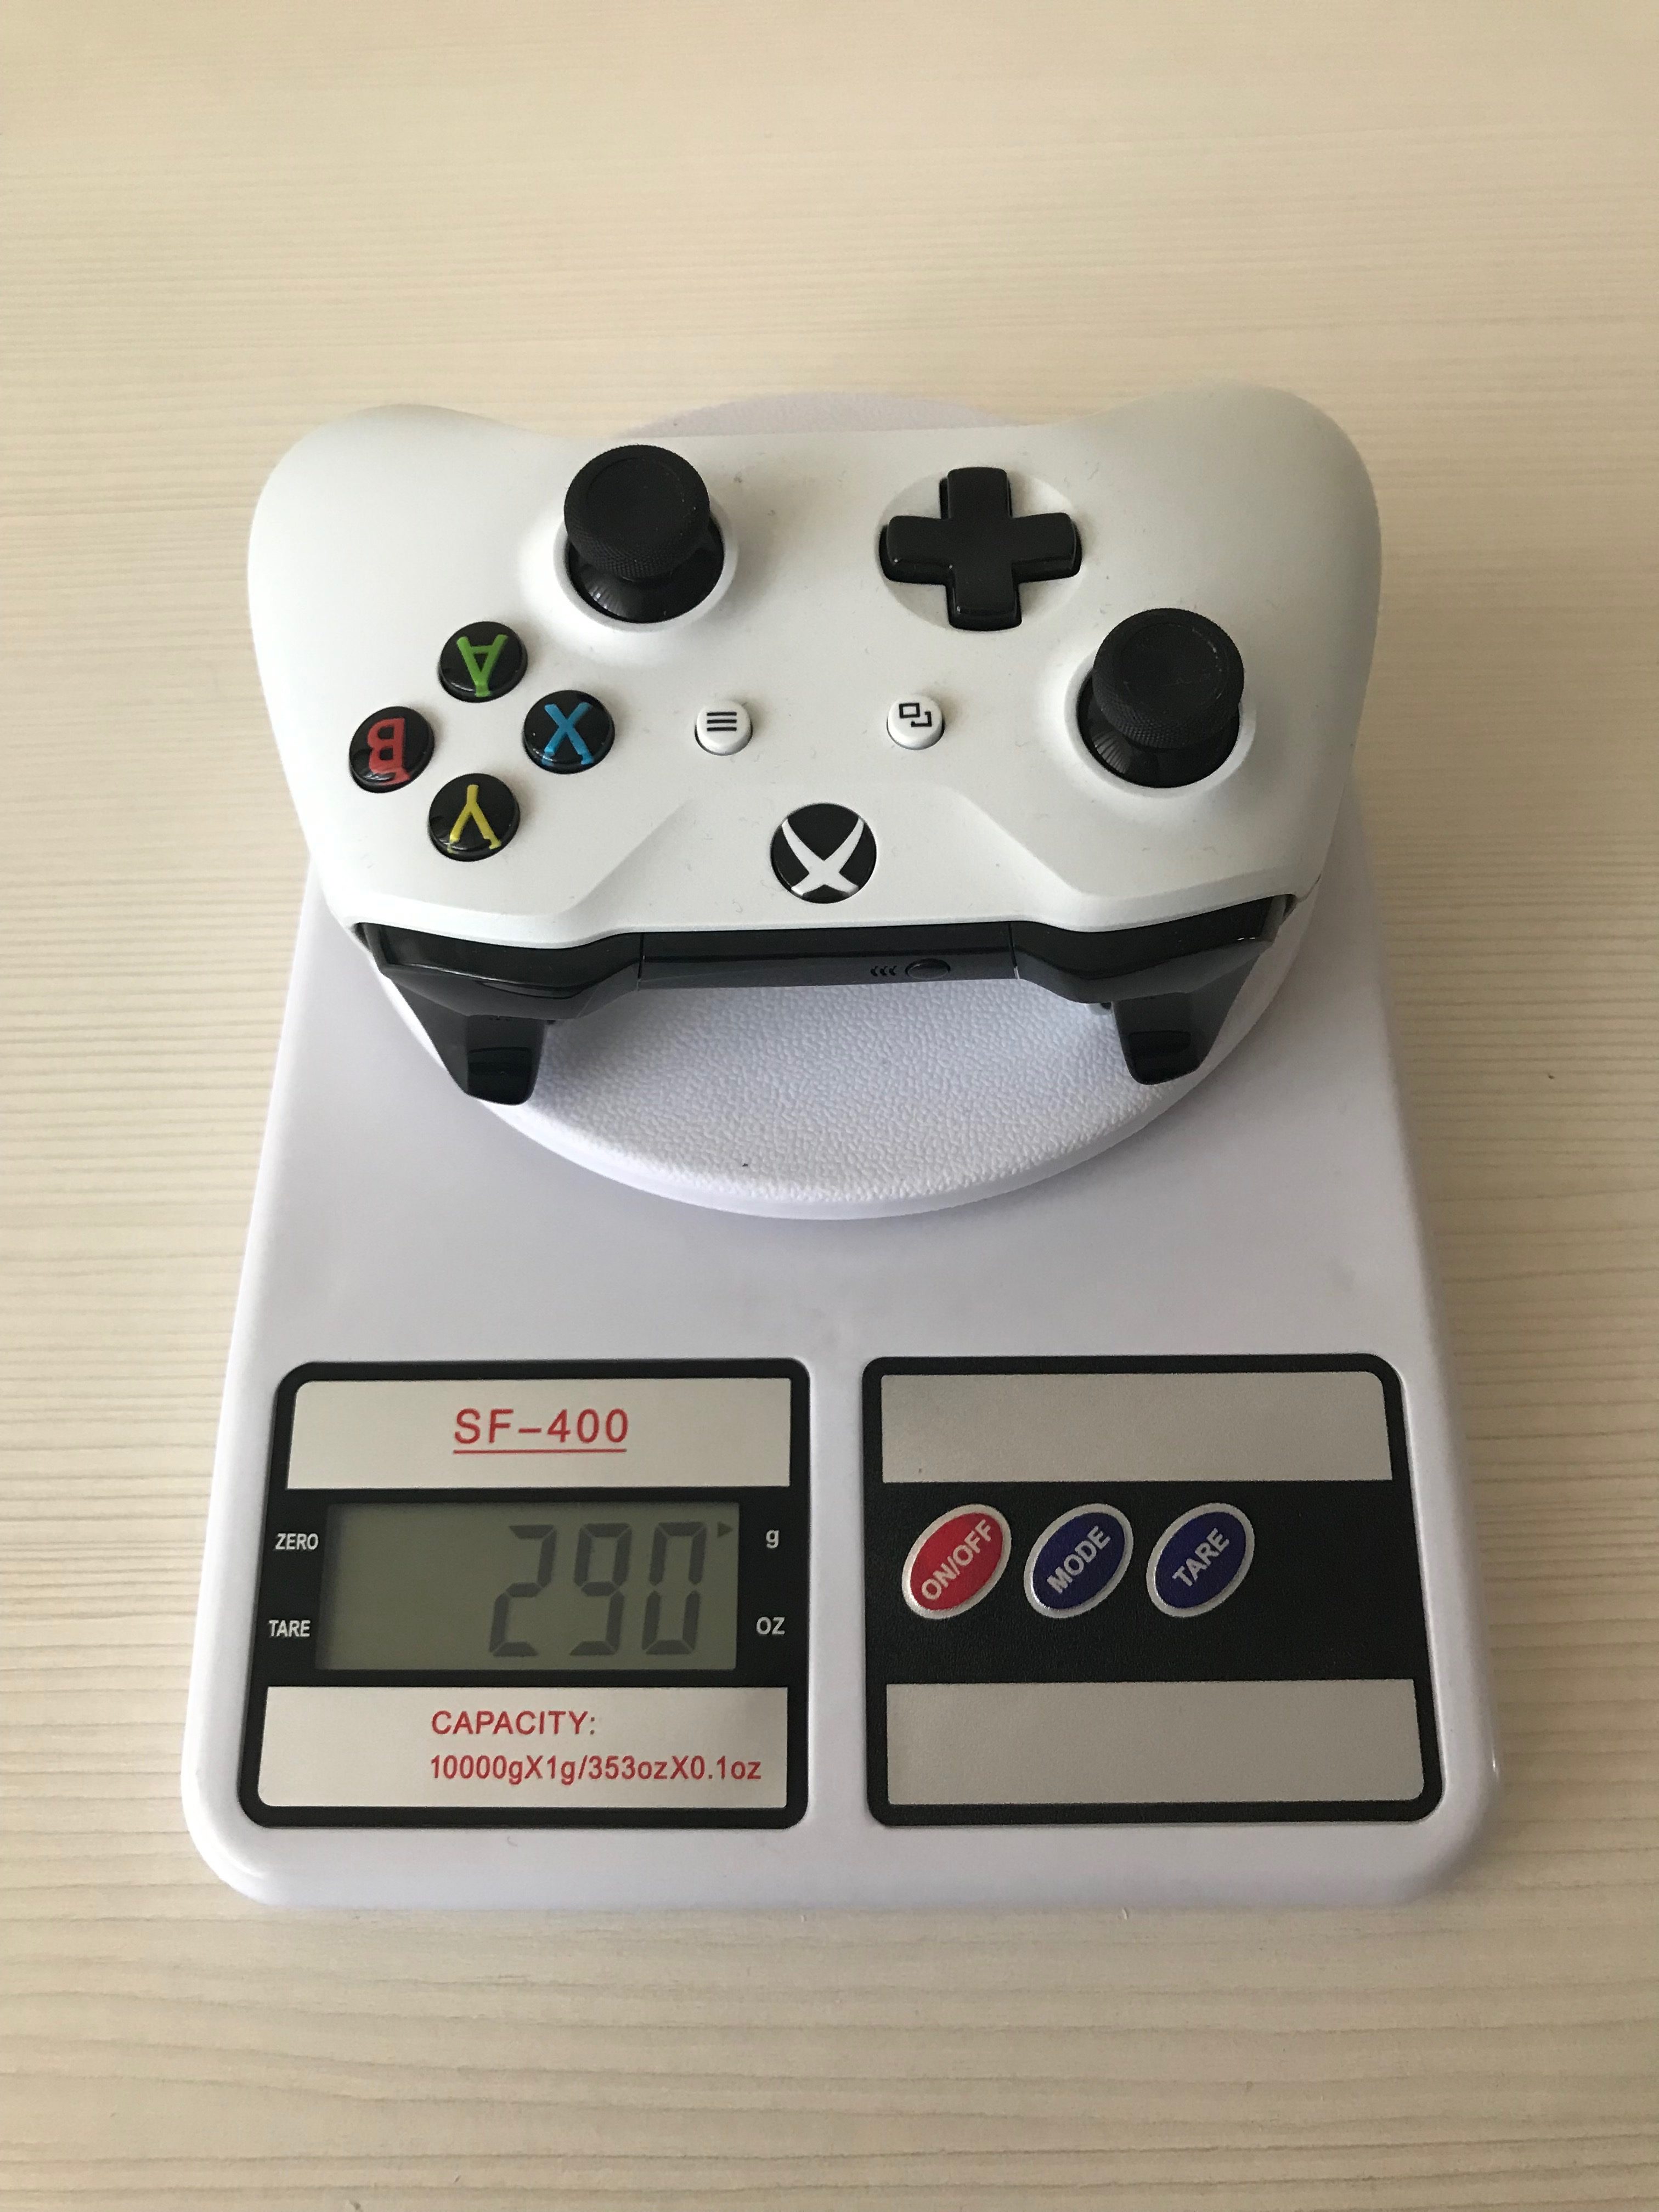 How much does a PS joystick weigh?